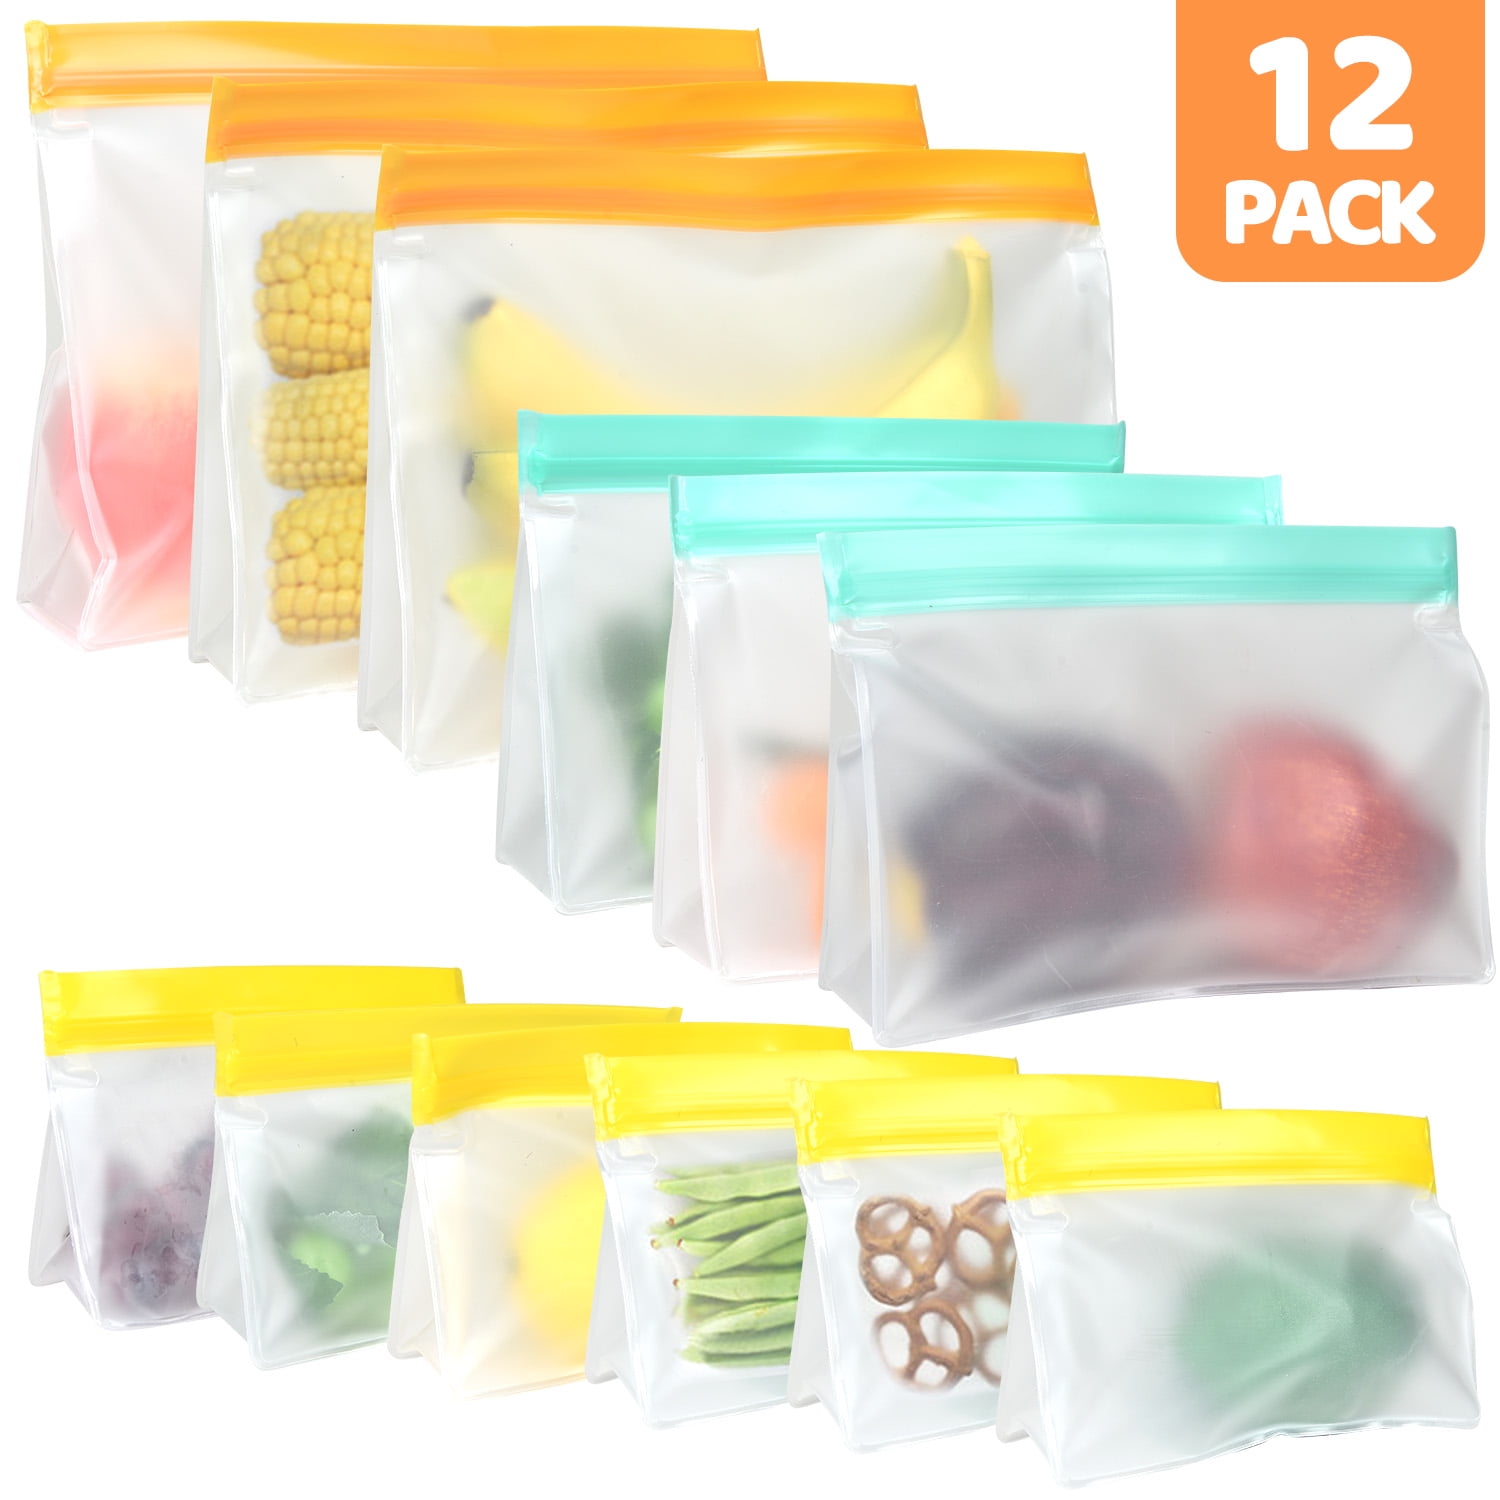 12Pack Reusable Storage Bags, Stand Up Reusable Freezer Bags, Reusable Gallon  Bags, Reusable Sandwich Bags, Silicone Storage Bags for Food, Meat, Fruit,  Snacks 